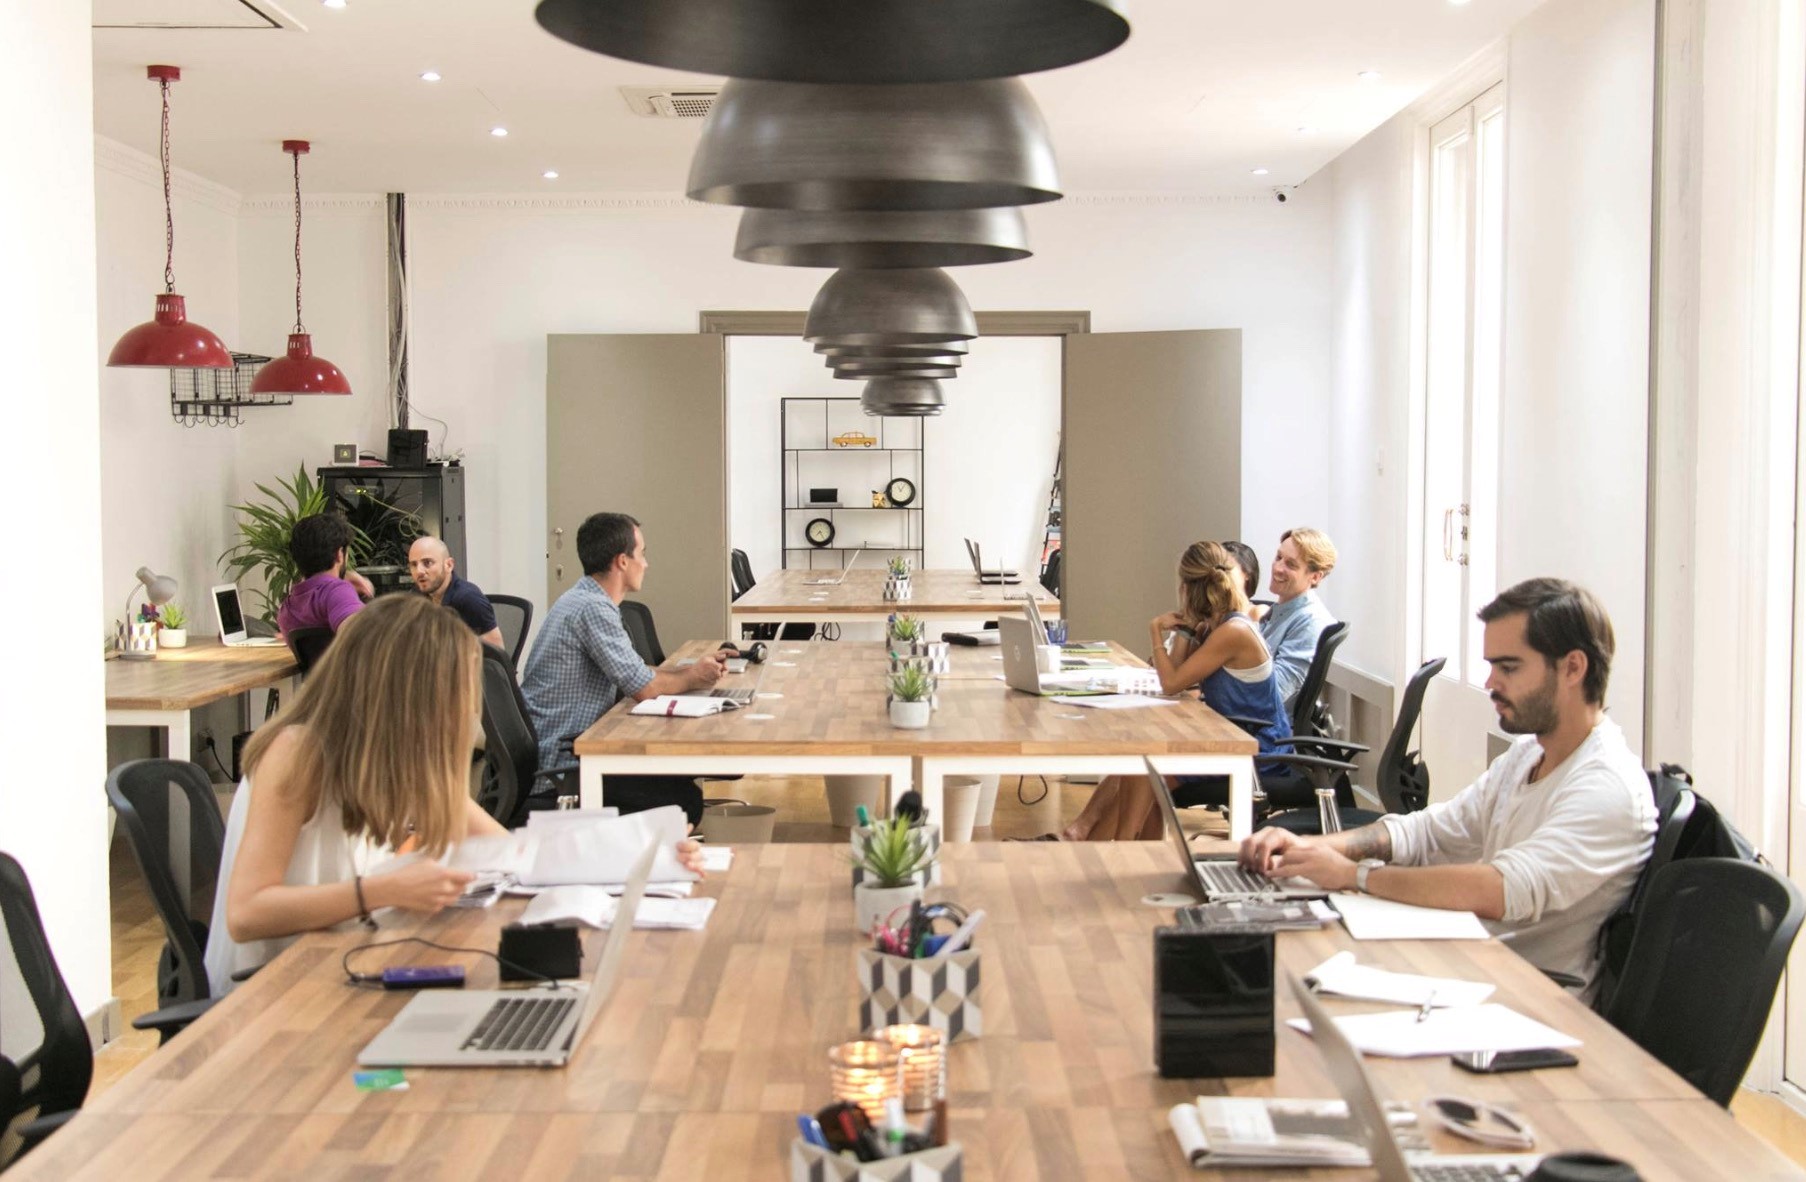 The rise of coworking: seizing new commercial opportunities